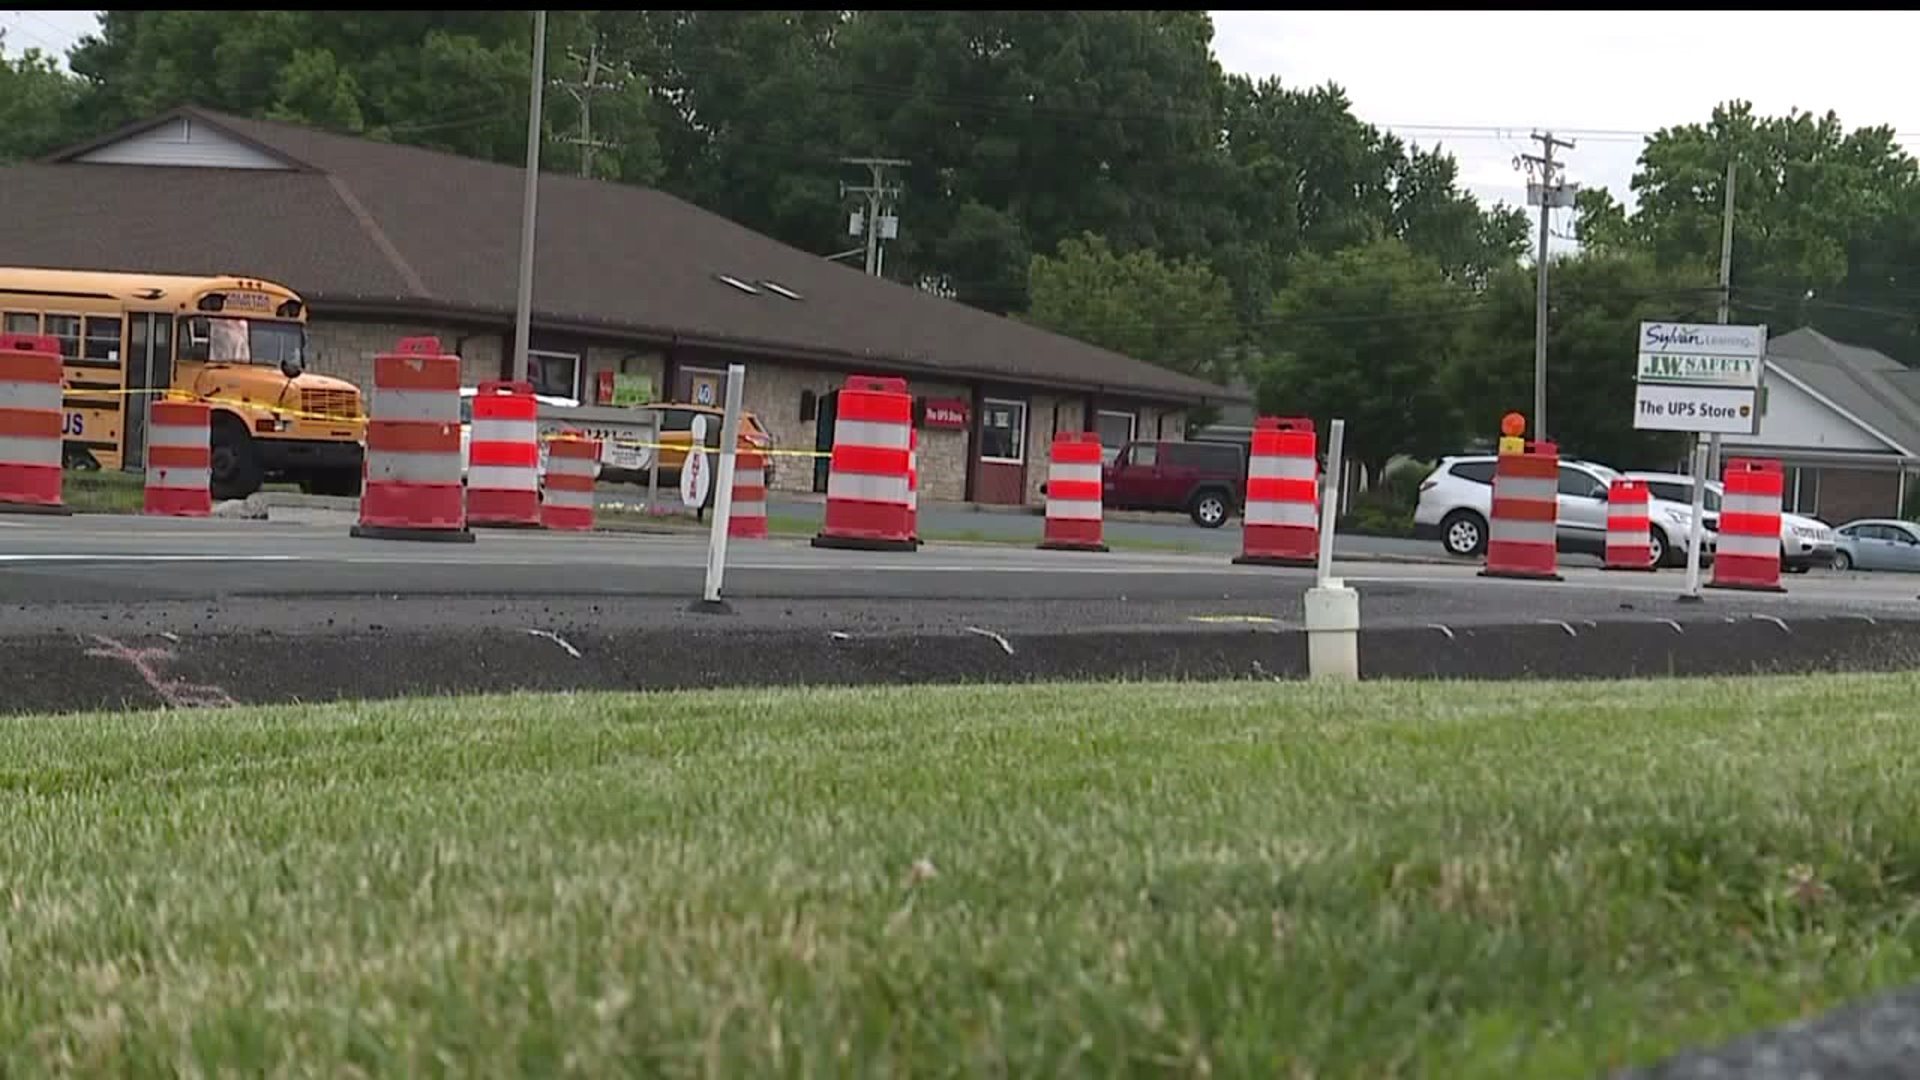 Sinkhole closes part of Route 422 for the second time in less than a month